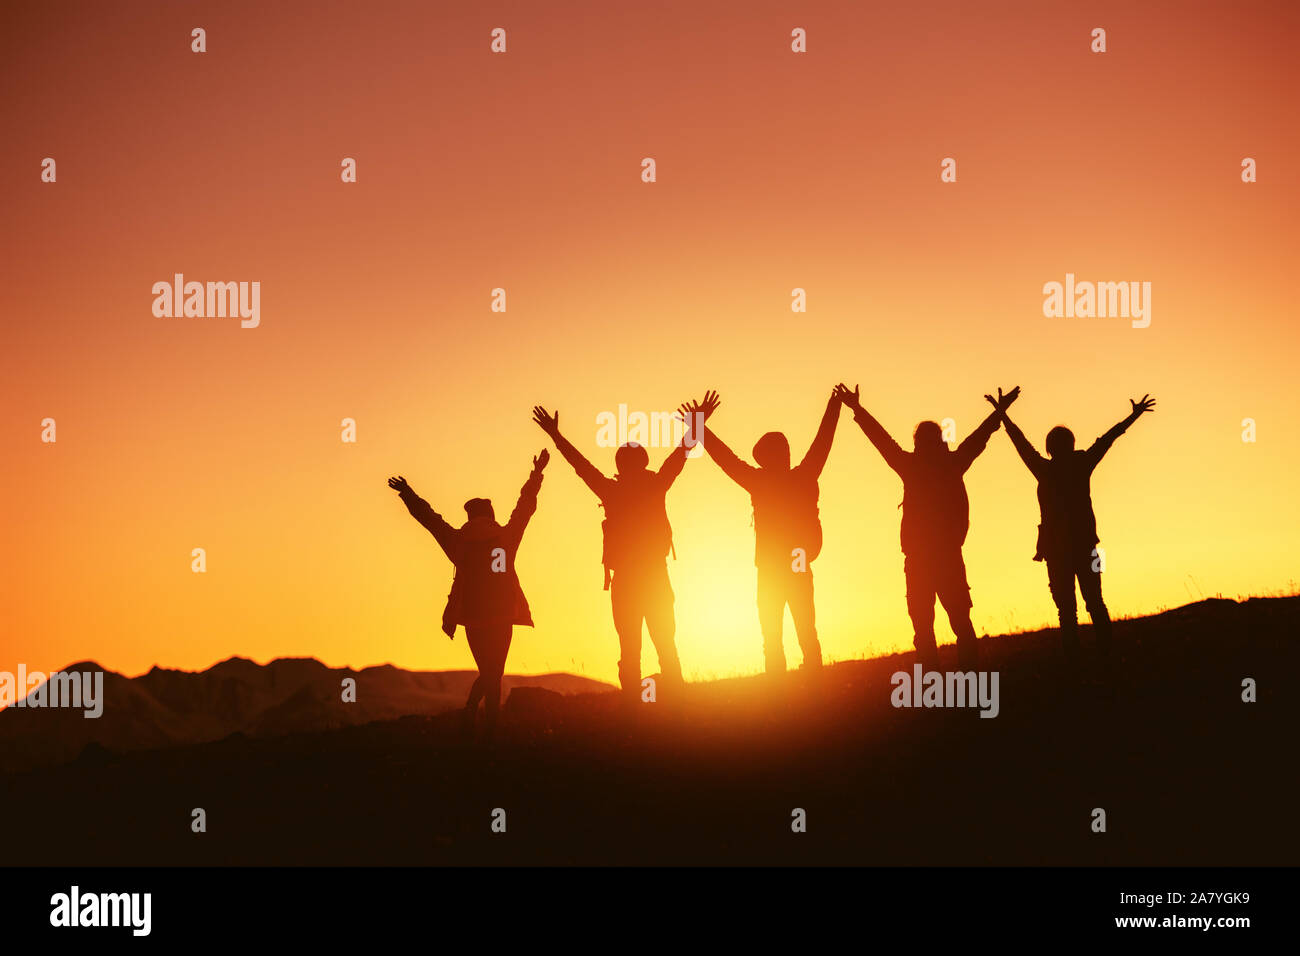 Group of happy peoples silhouettes stands with raised arms against sunset and mountains Stock Photo